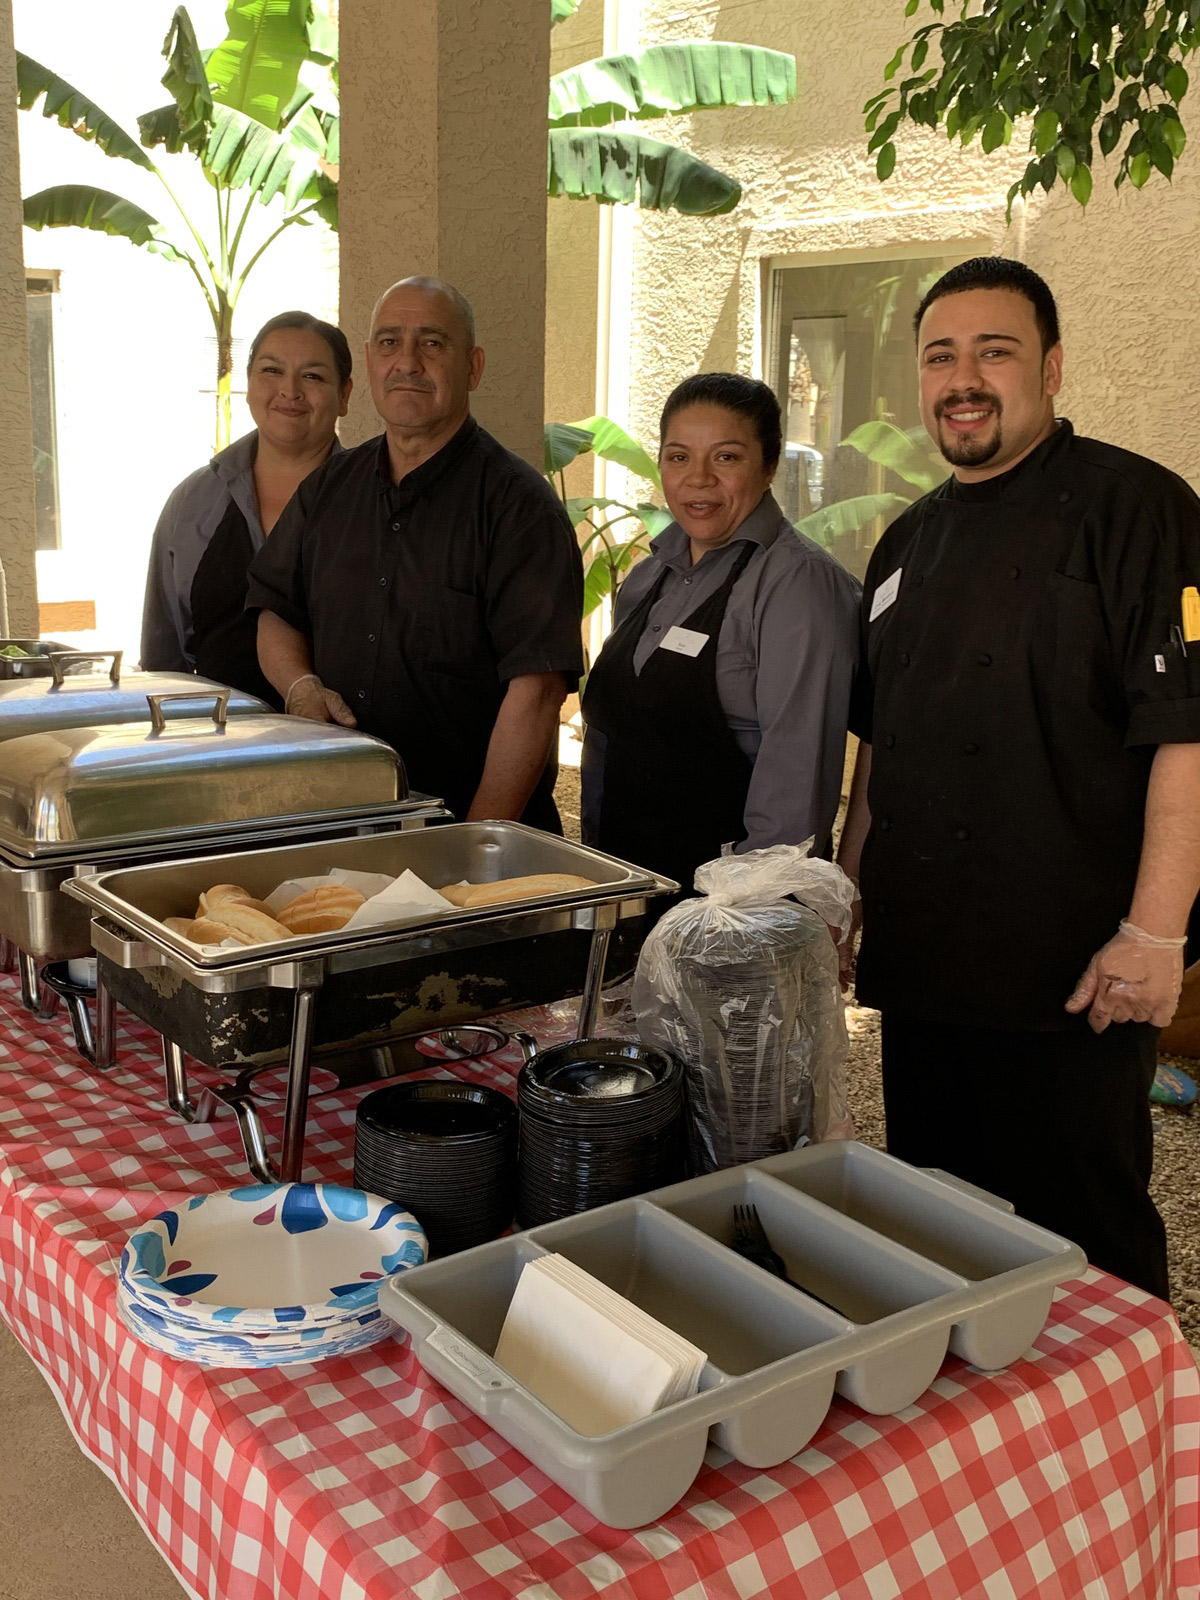 Culinary Services team at BBQ event